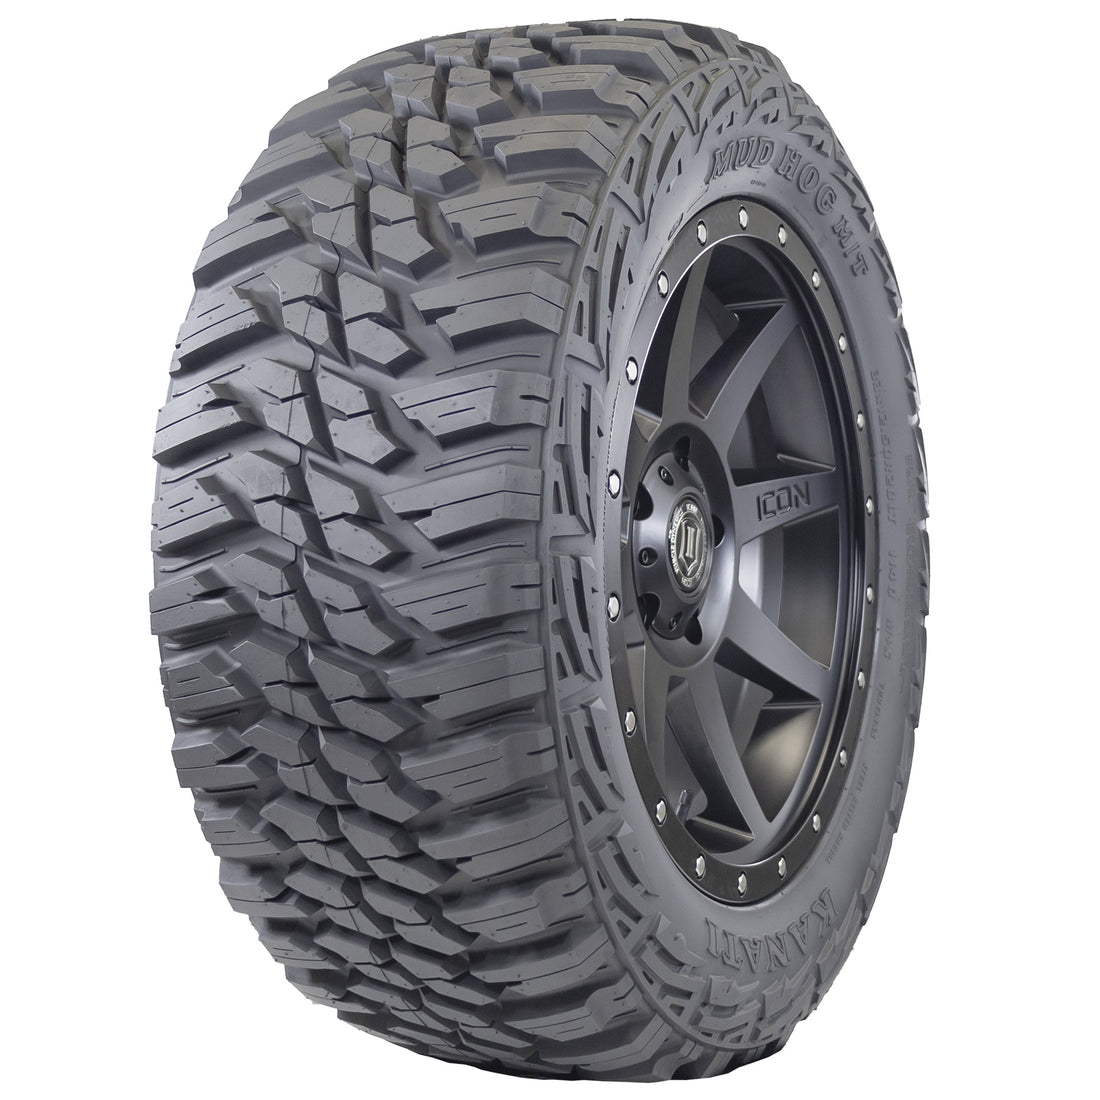 This image prominently displays the Kanati Mud HOG M/T tire's distinctively aggressive tread pattern, designed to deliver exceptional off-road traction. Additionally, it showcases the tire's rugged sidewall pattern, adding both style and durability to the tire's overall appearance.